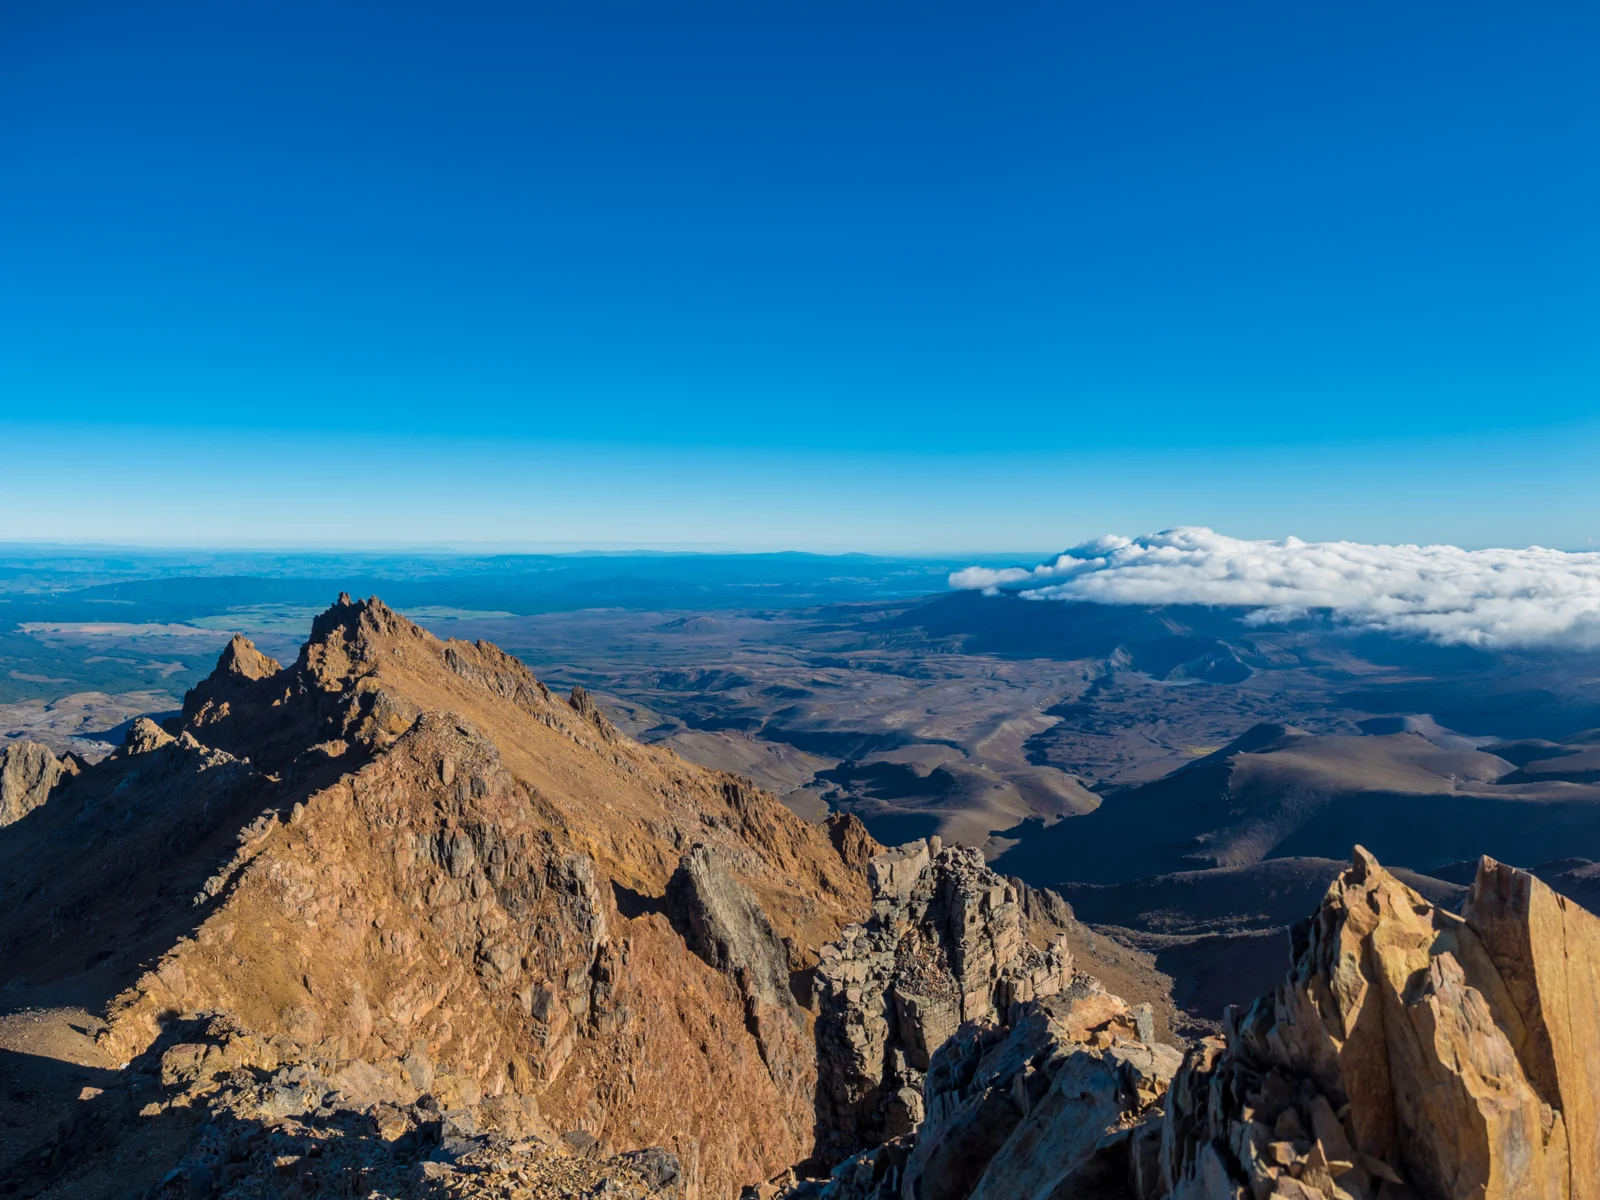 Peak of Mount Ruapehu during summer, with rocky and parched ground, is one of the Lord of the Rings Filming Locations you can climb